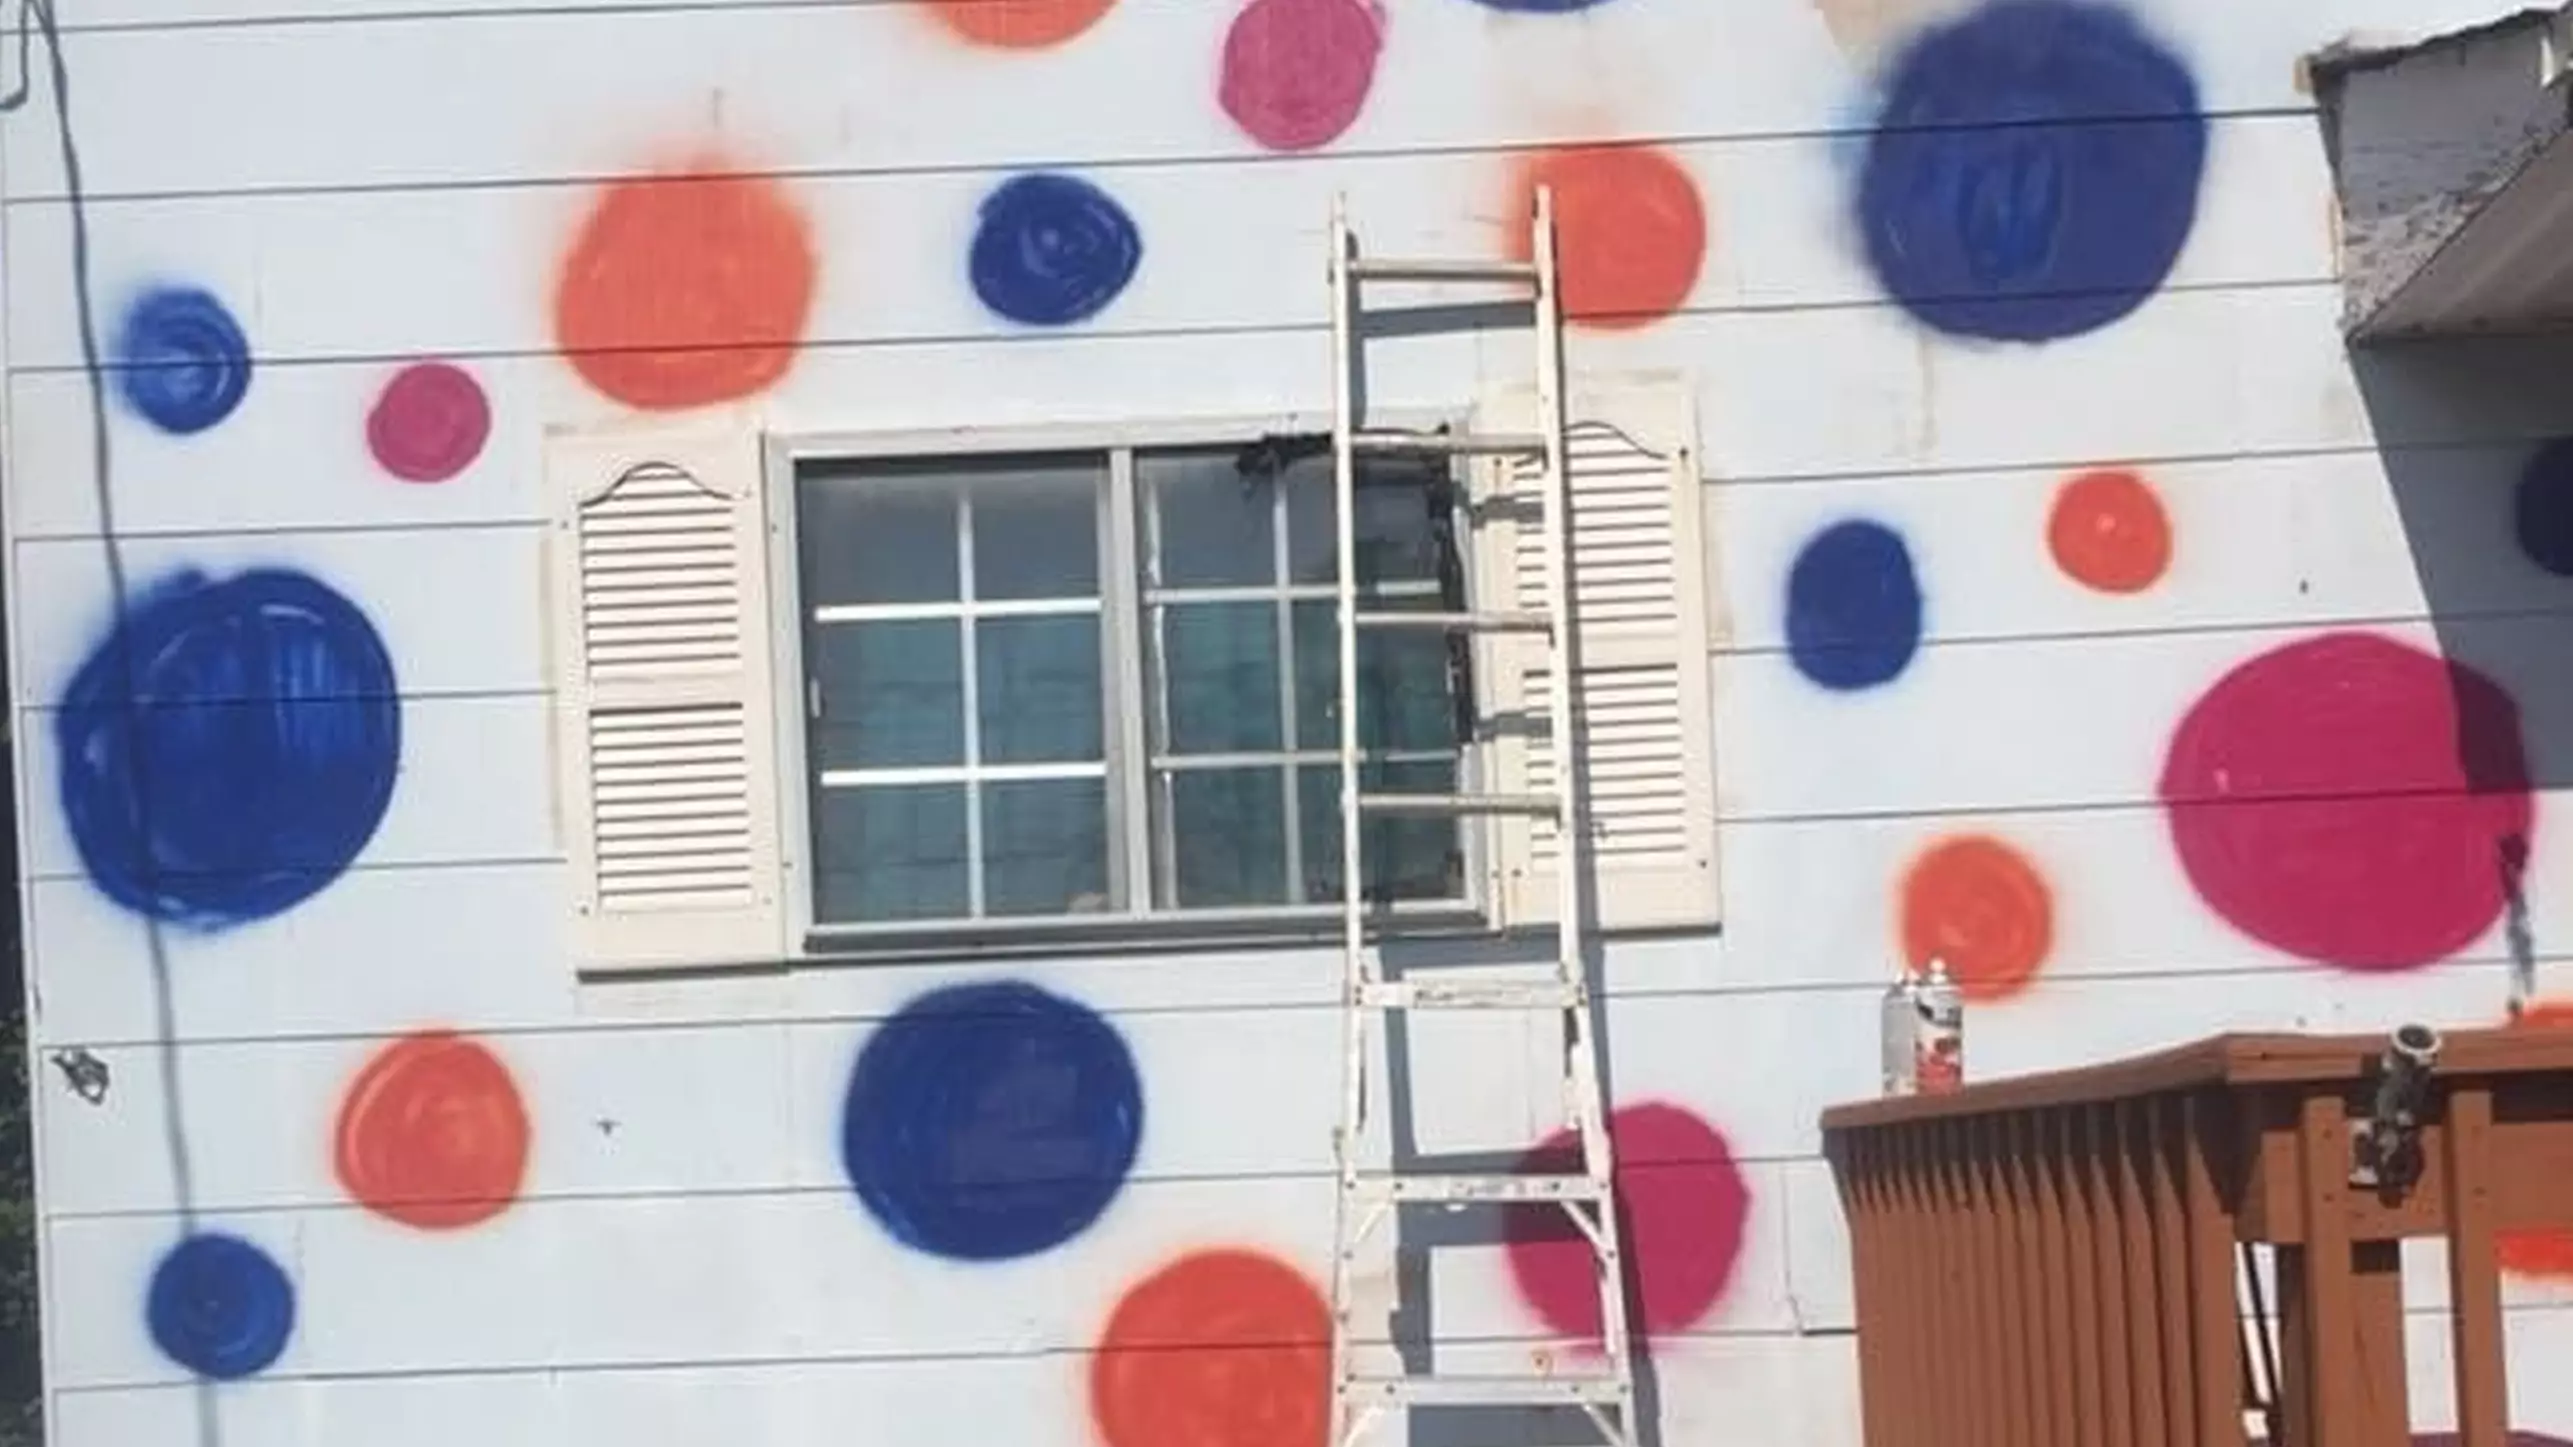 Woman Hilariously Paints ‘Ugly’ Polka Dots On House To Annoy 'Miserable' Neighbours